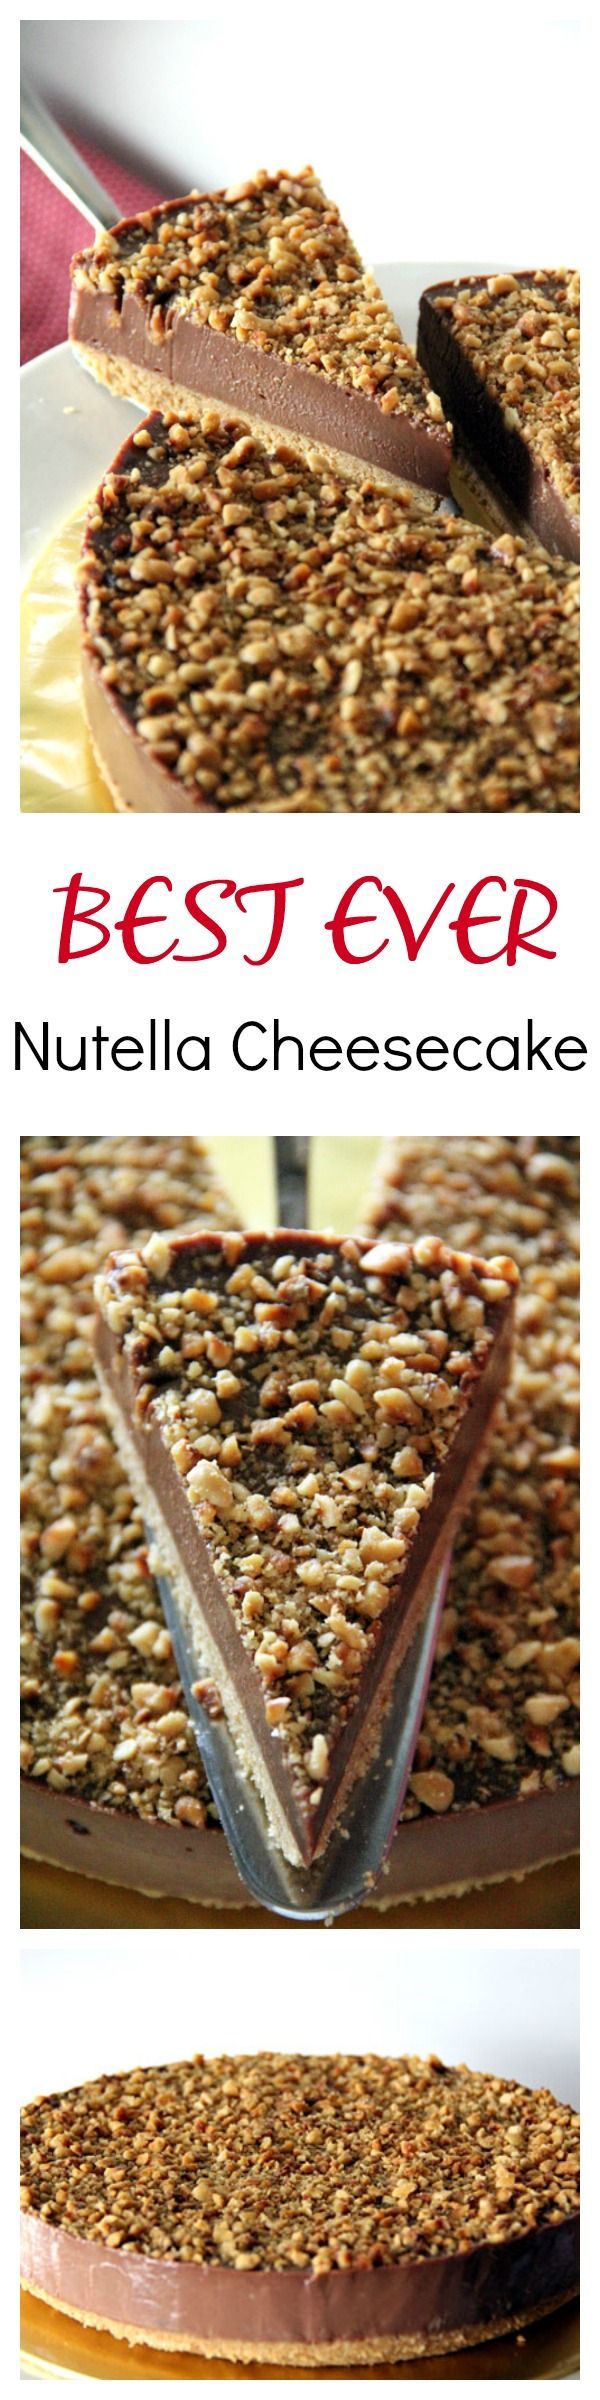 Best-ever NO BAKE Nutella Cheesecake with toasted hazelnut, to-die-for richest and creamiest